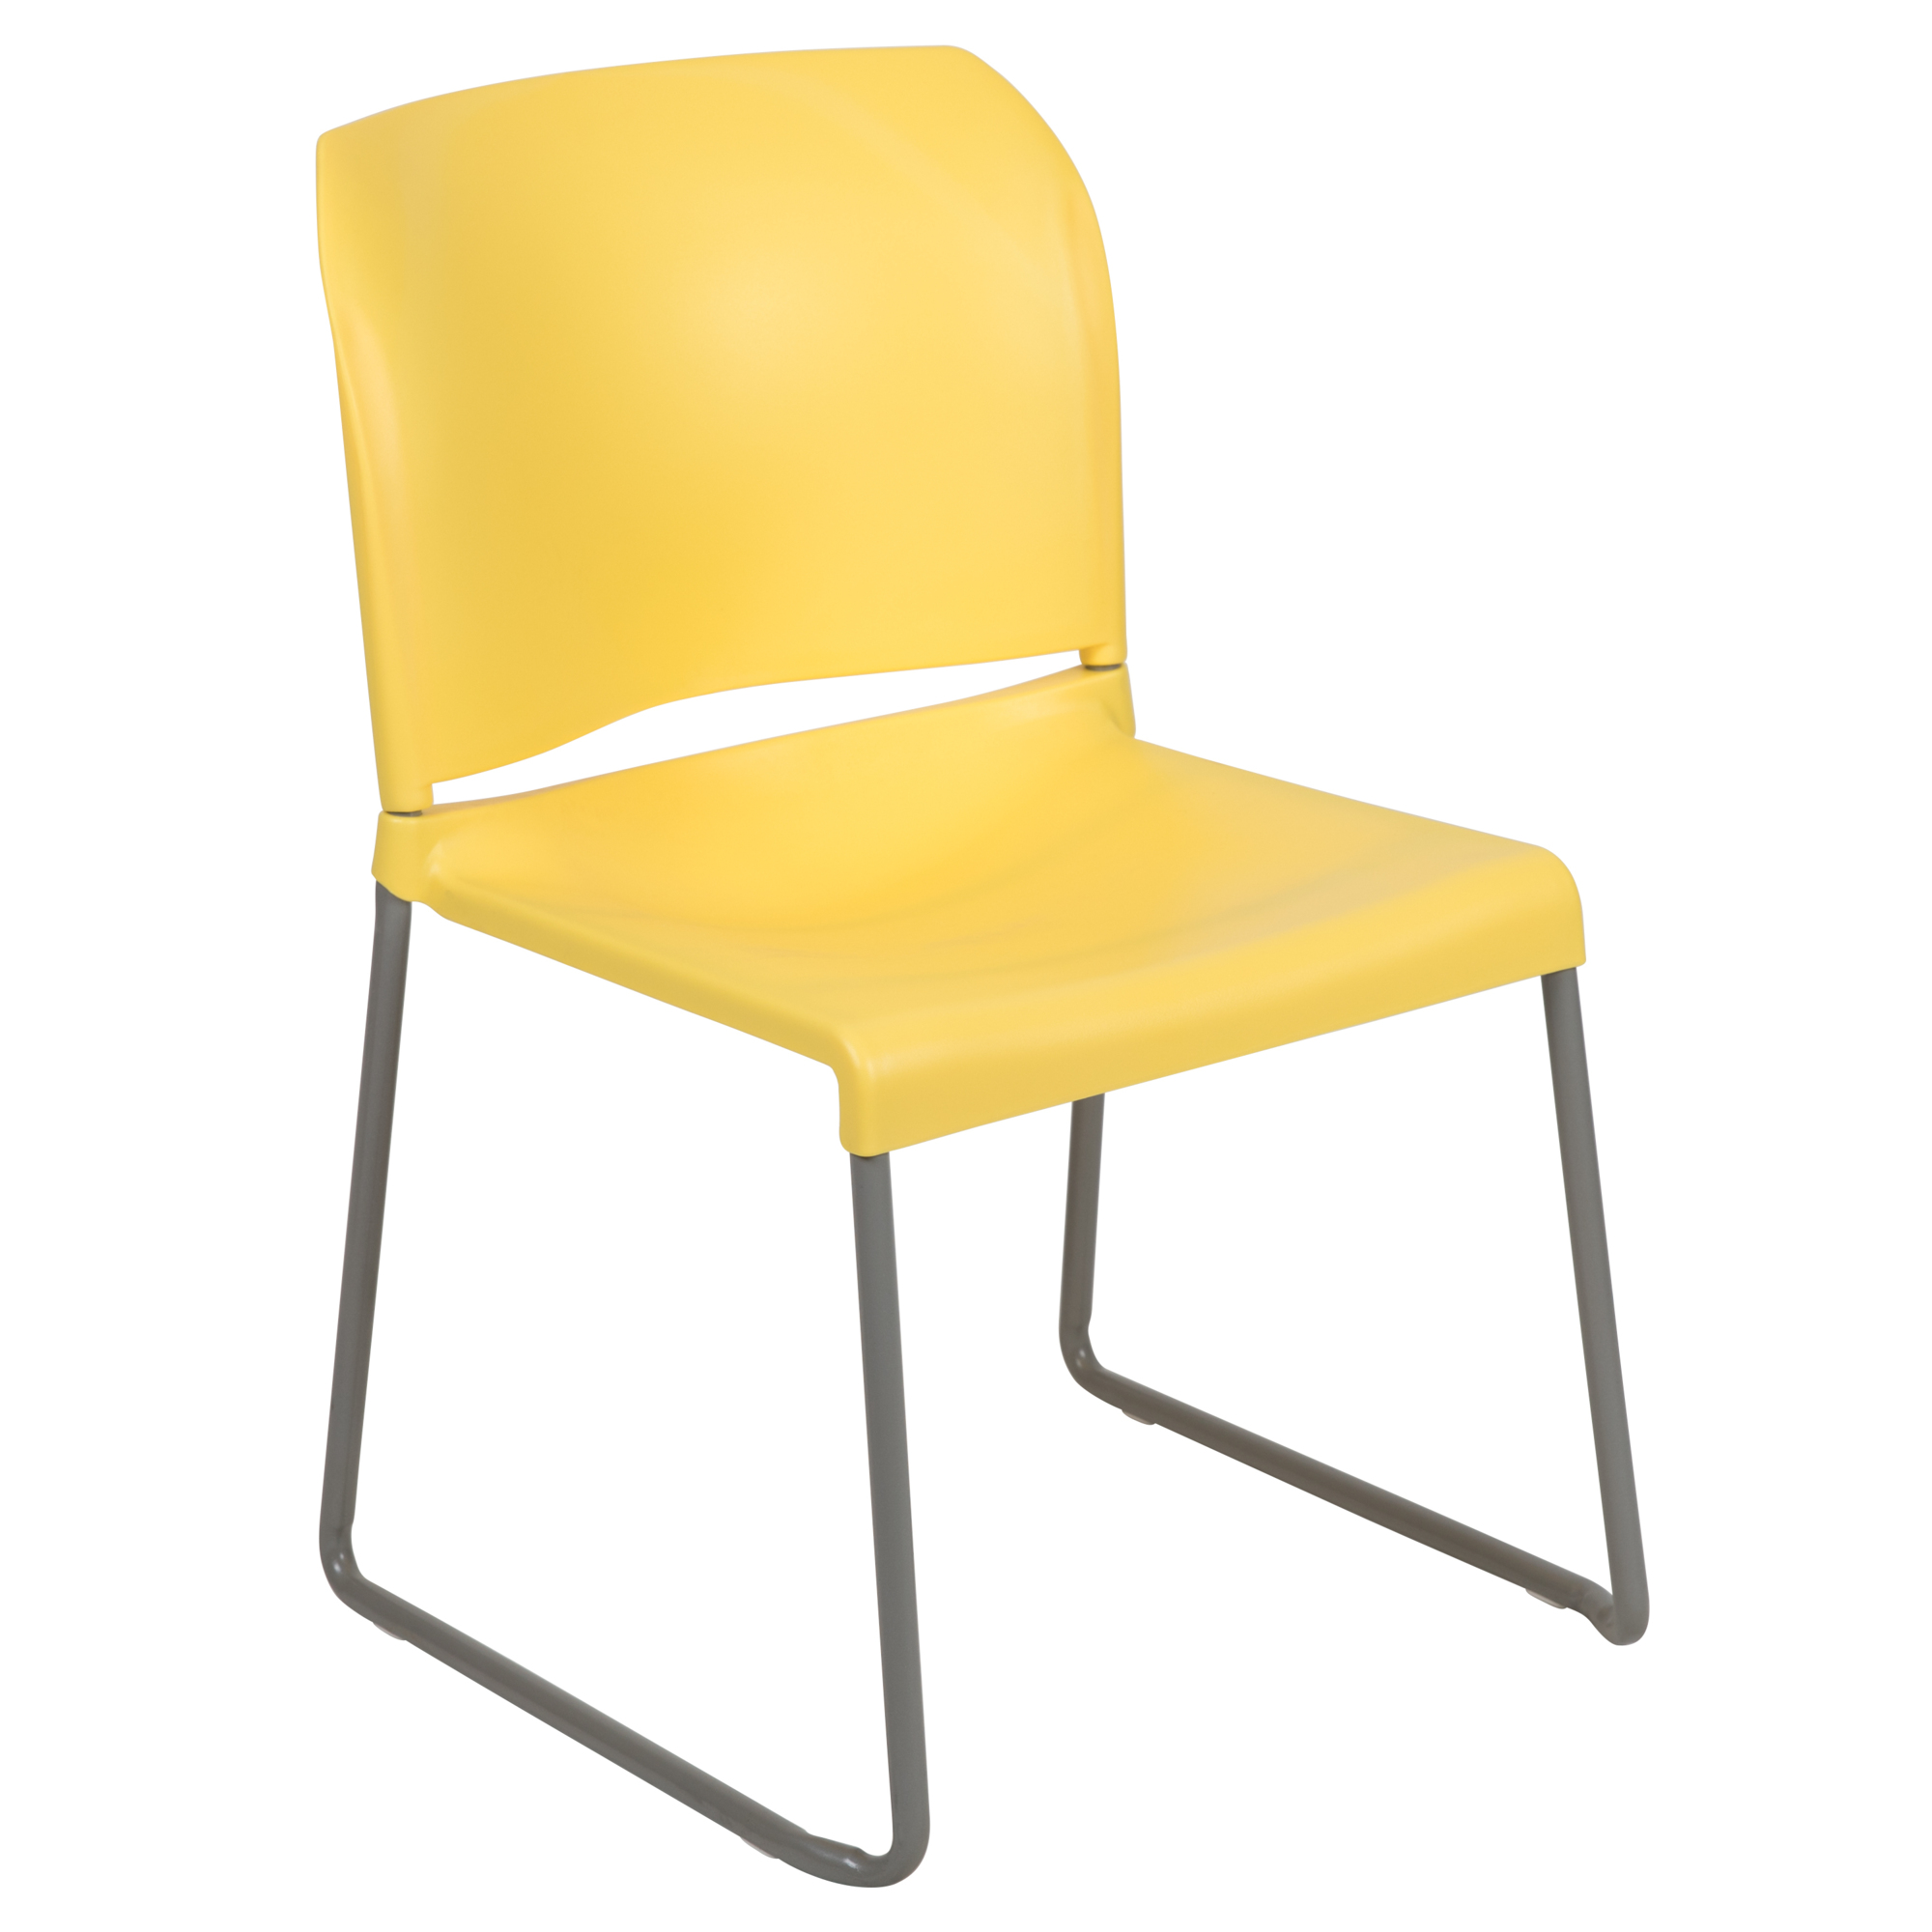 Flash Furniture, Yellow Full Back Contoured Sled Base Stack Chair, Primary Color Yellow, Included (qty.) 1, Model RUT238AYL